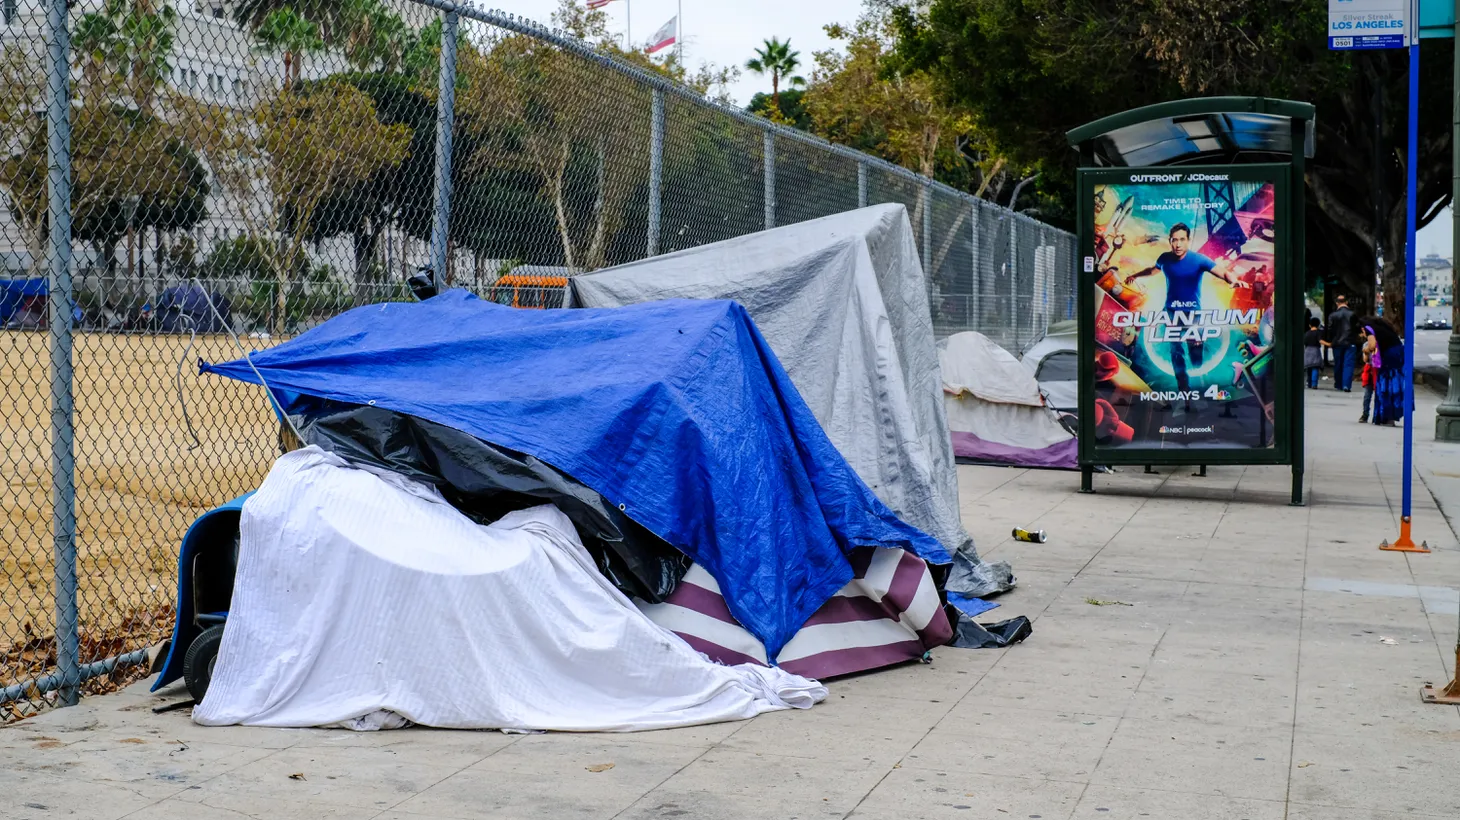 Homeless encampments line a sidewalk near LA City Hall in downtown, October 14, 2022. “People in the city and the county have essentially over these years worked to address and reduce the problem, but not with the fortitude of ‘this has got to end,’” Karen Bass says of the homelessness crisis.